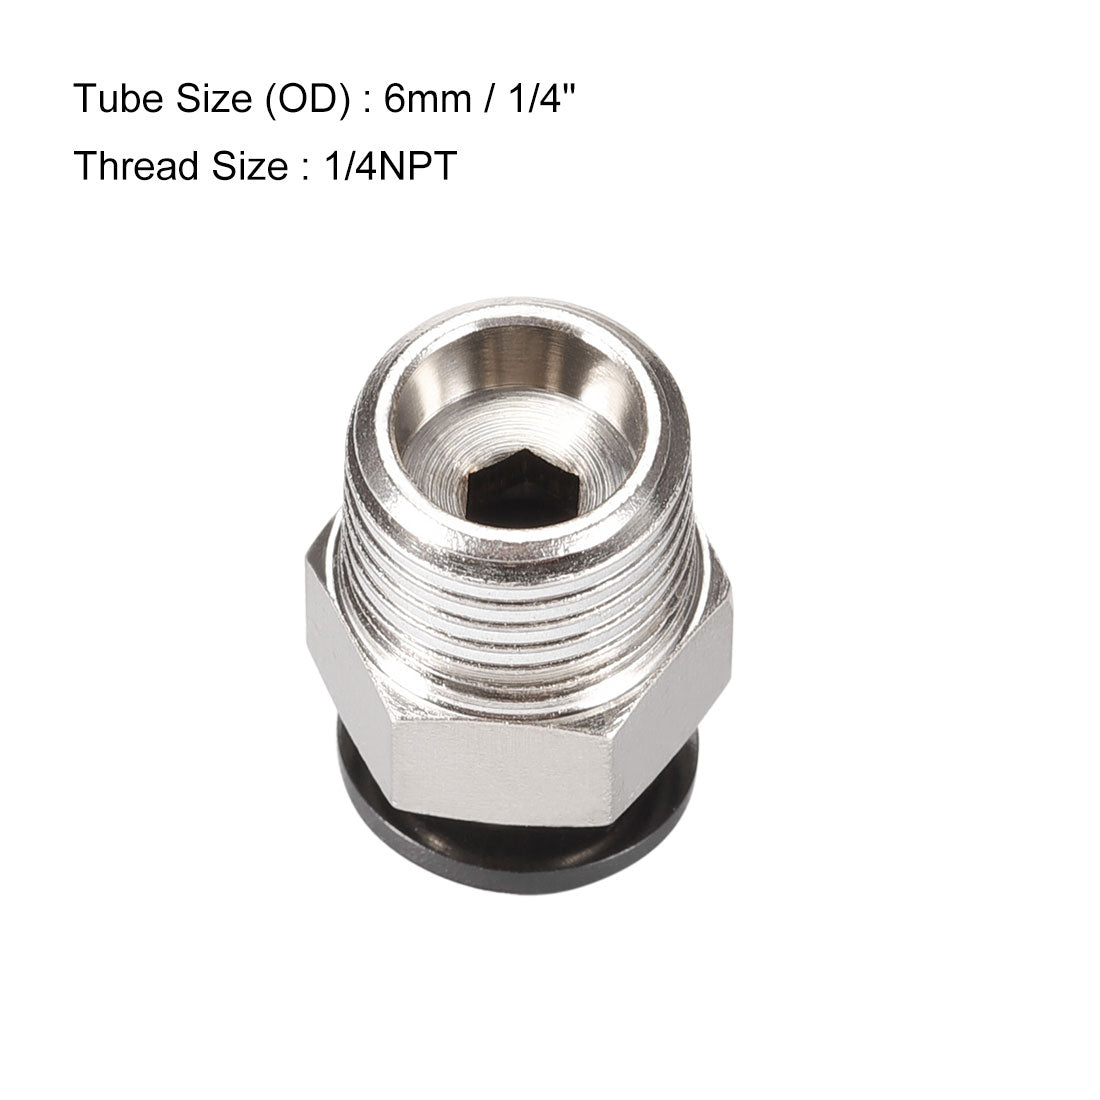 uxcell Uxcell Straight Pneumatic Push to Quick Connect Fittings 1/4NPT Male x 6mm Tube OD Silver Tone